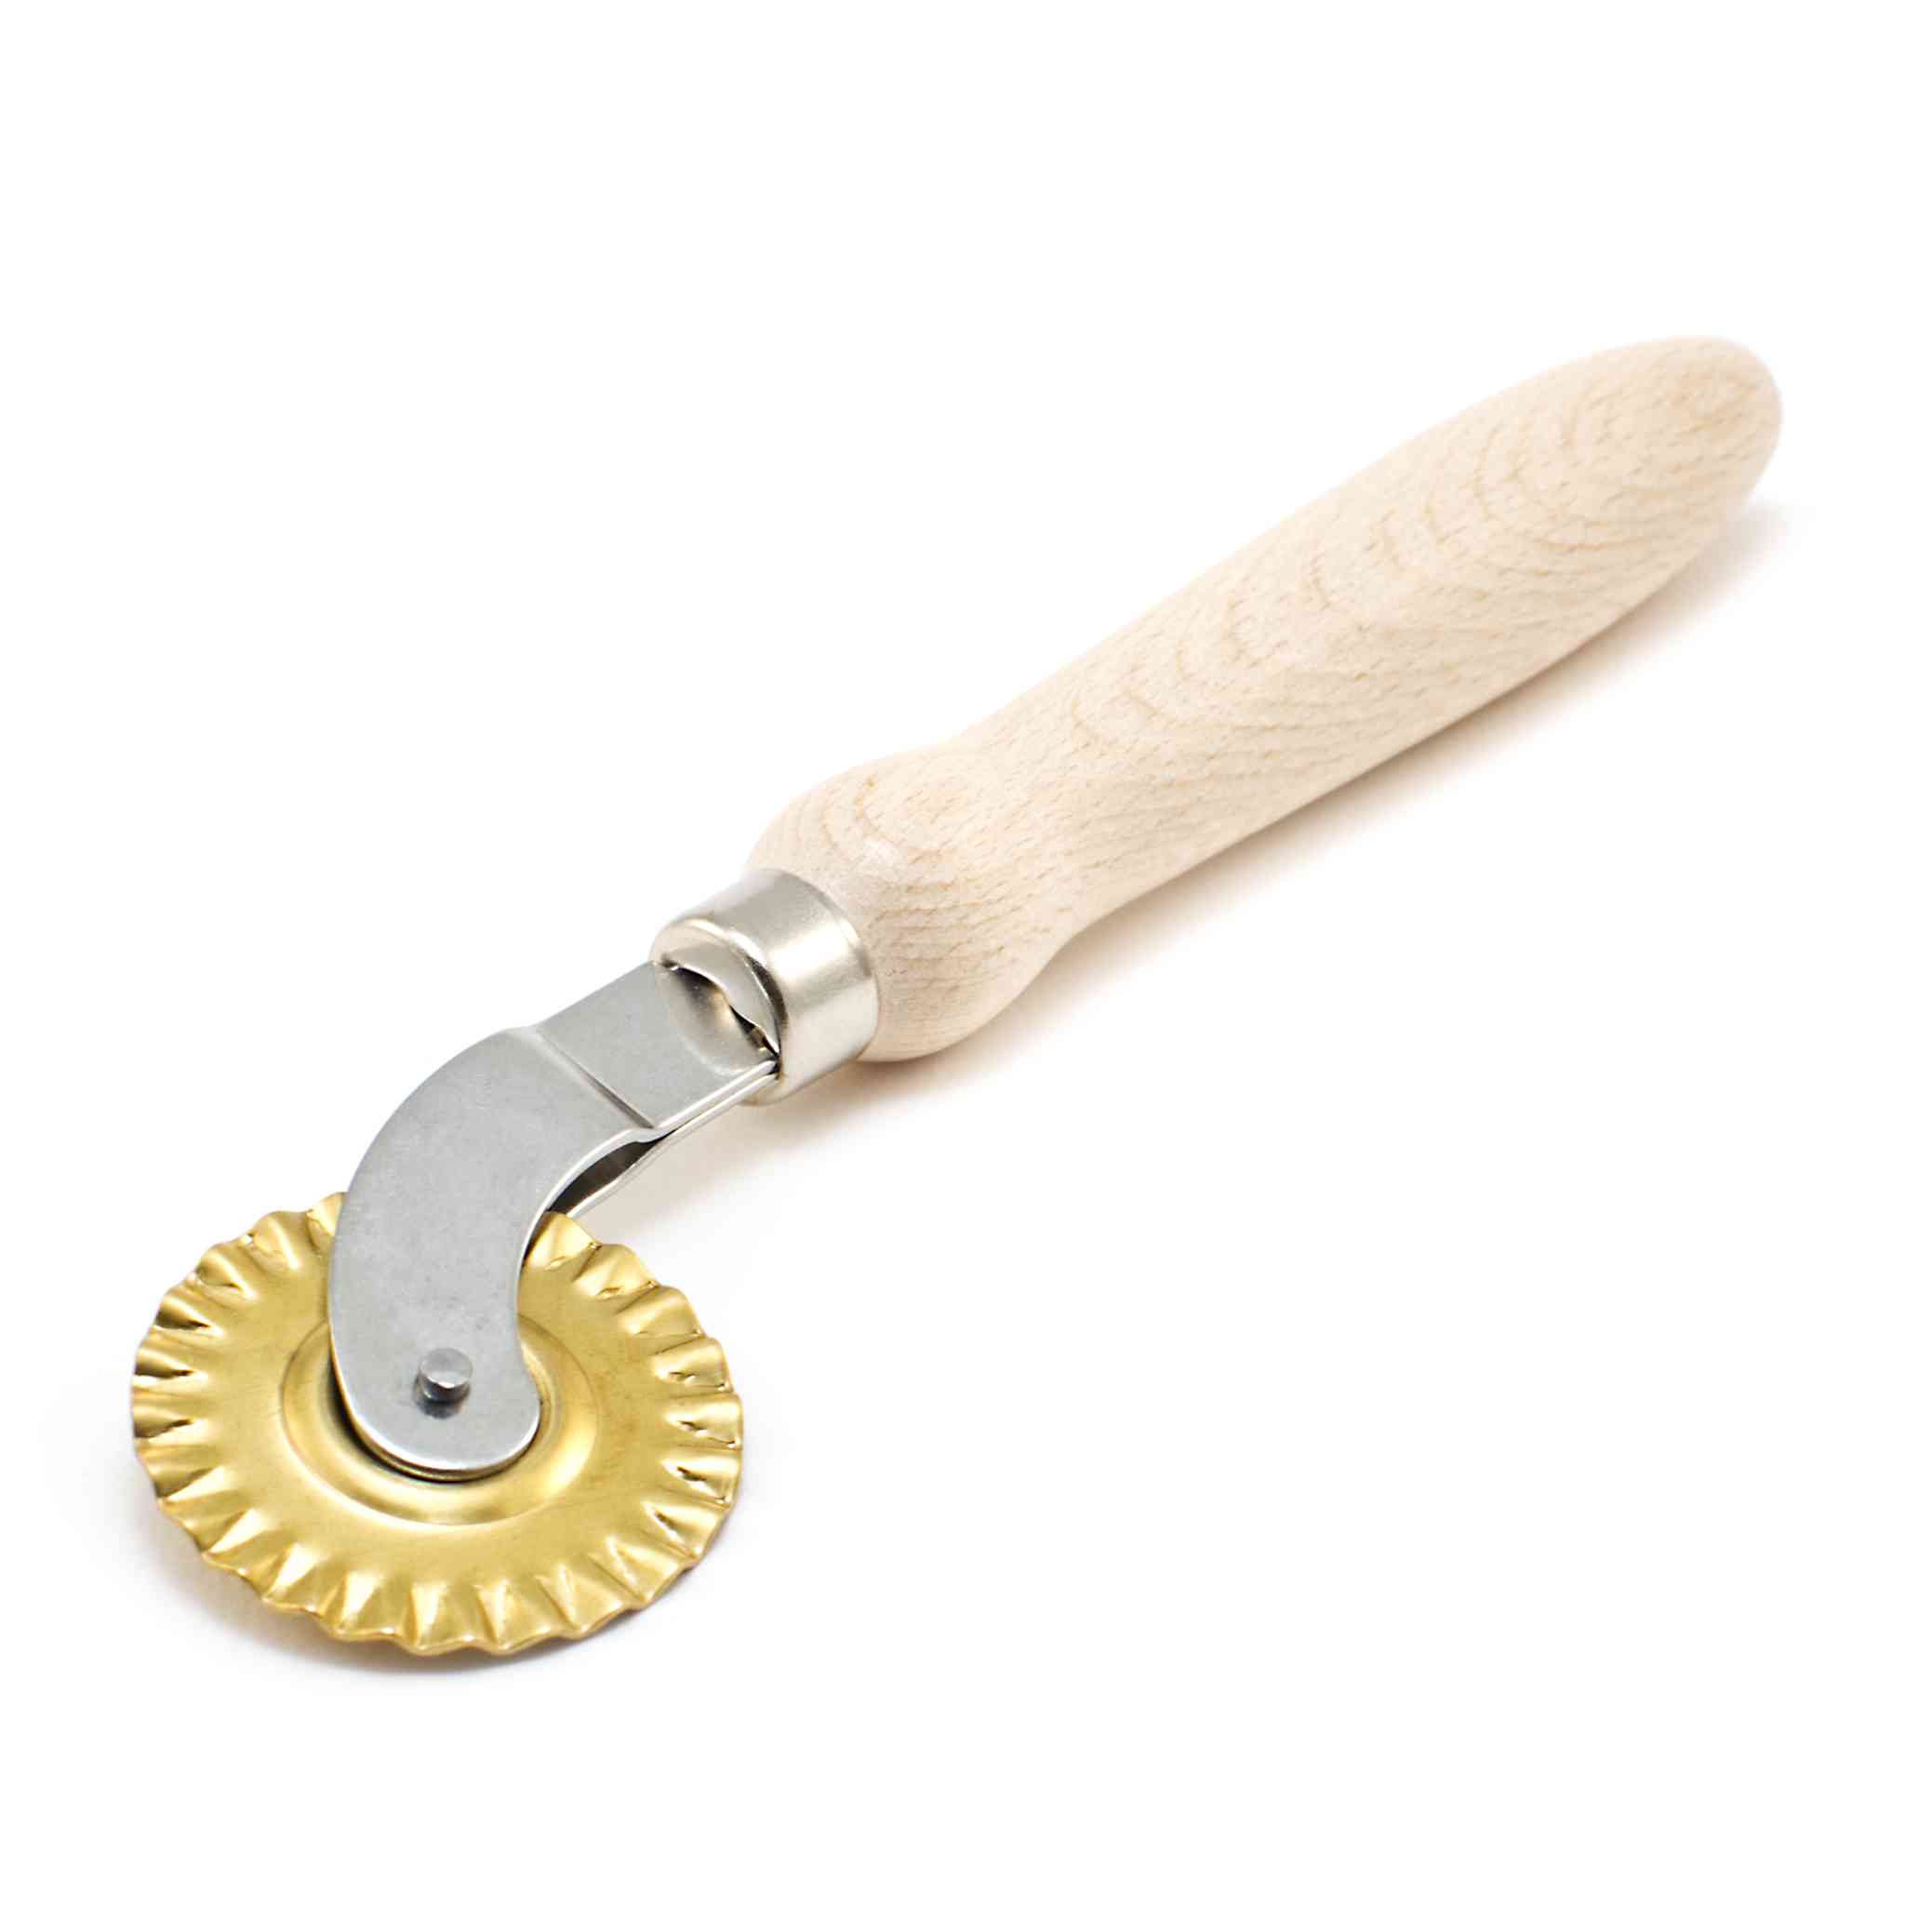 Curved Pastry / Pasta Cutter with Brass Wheel and Beech Handle